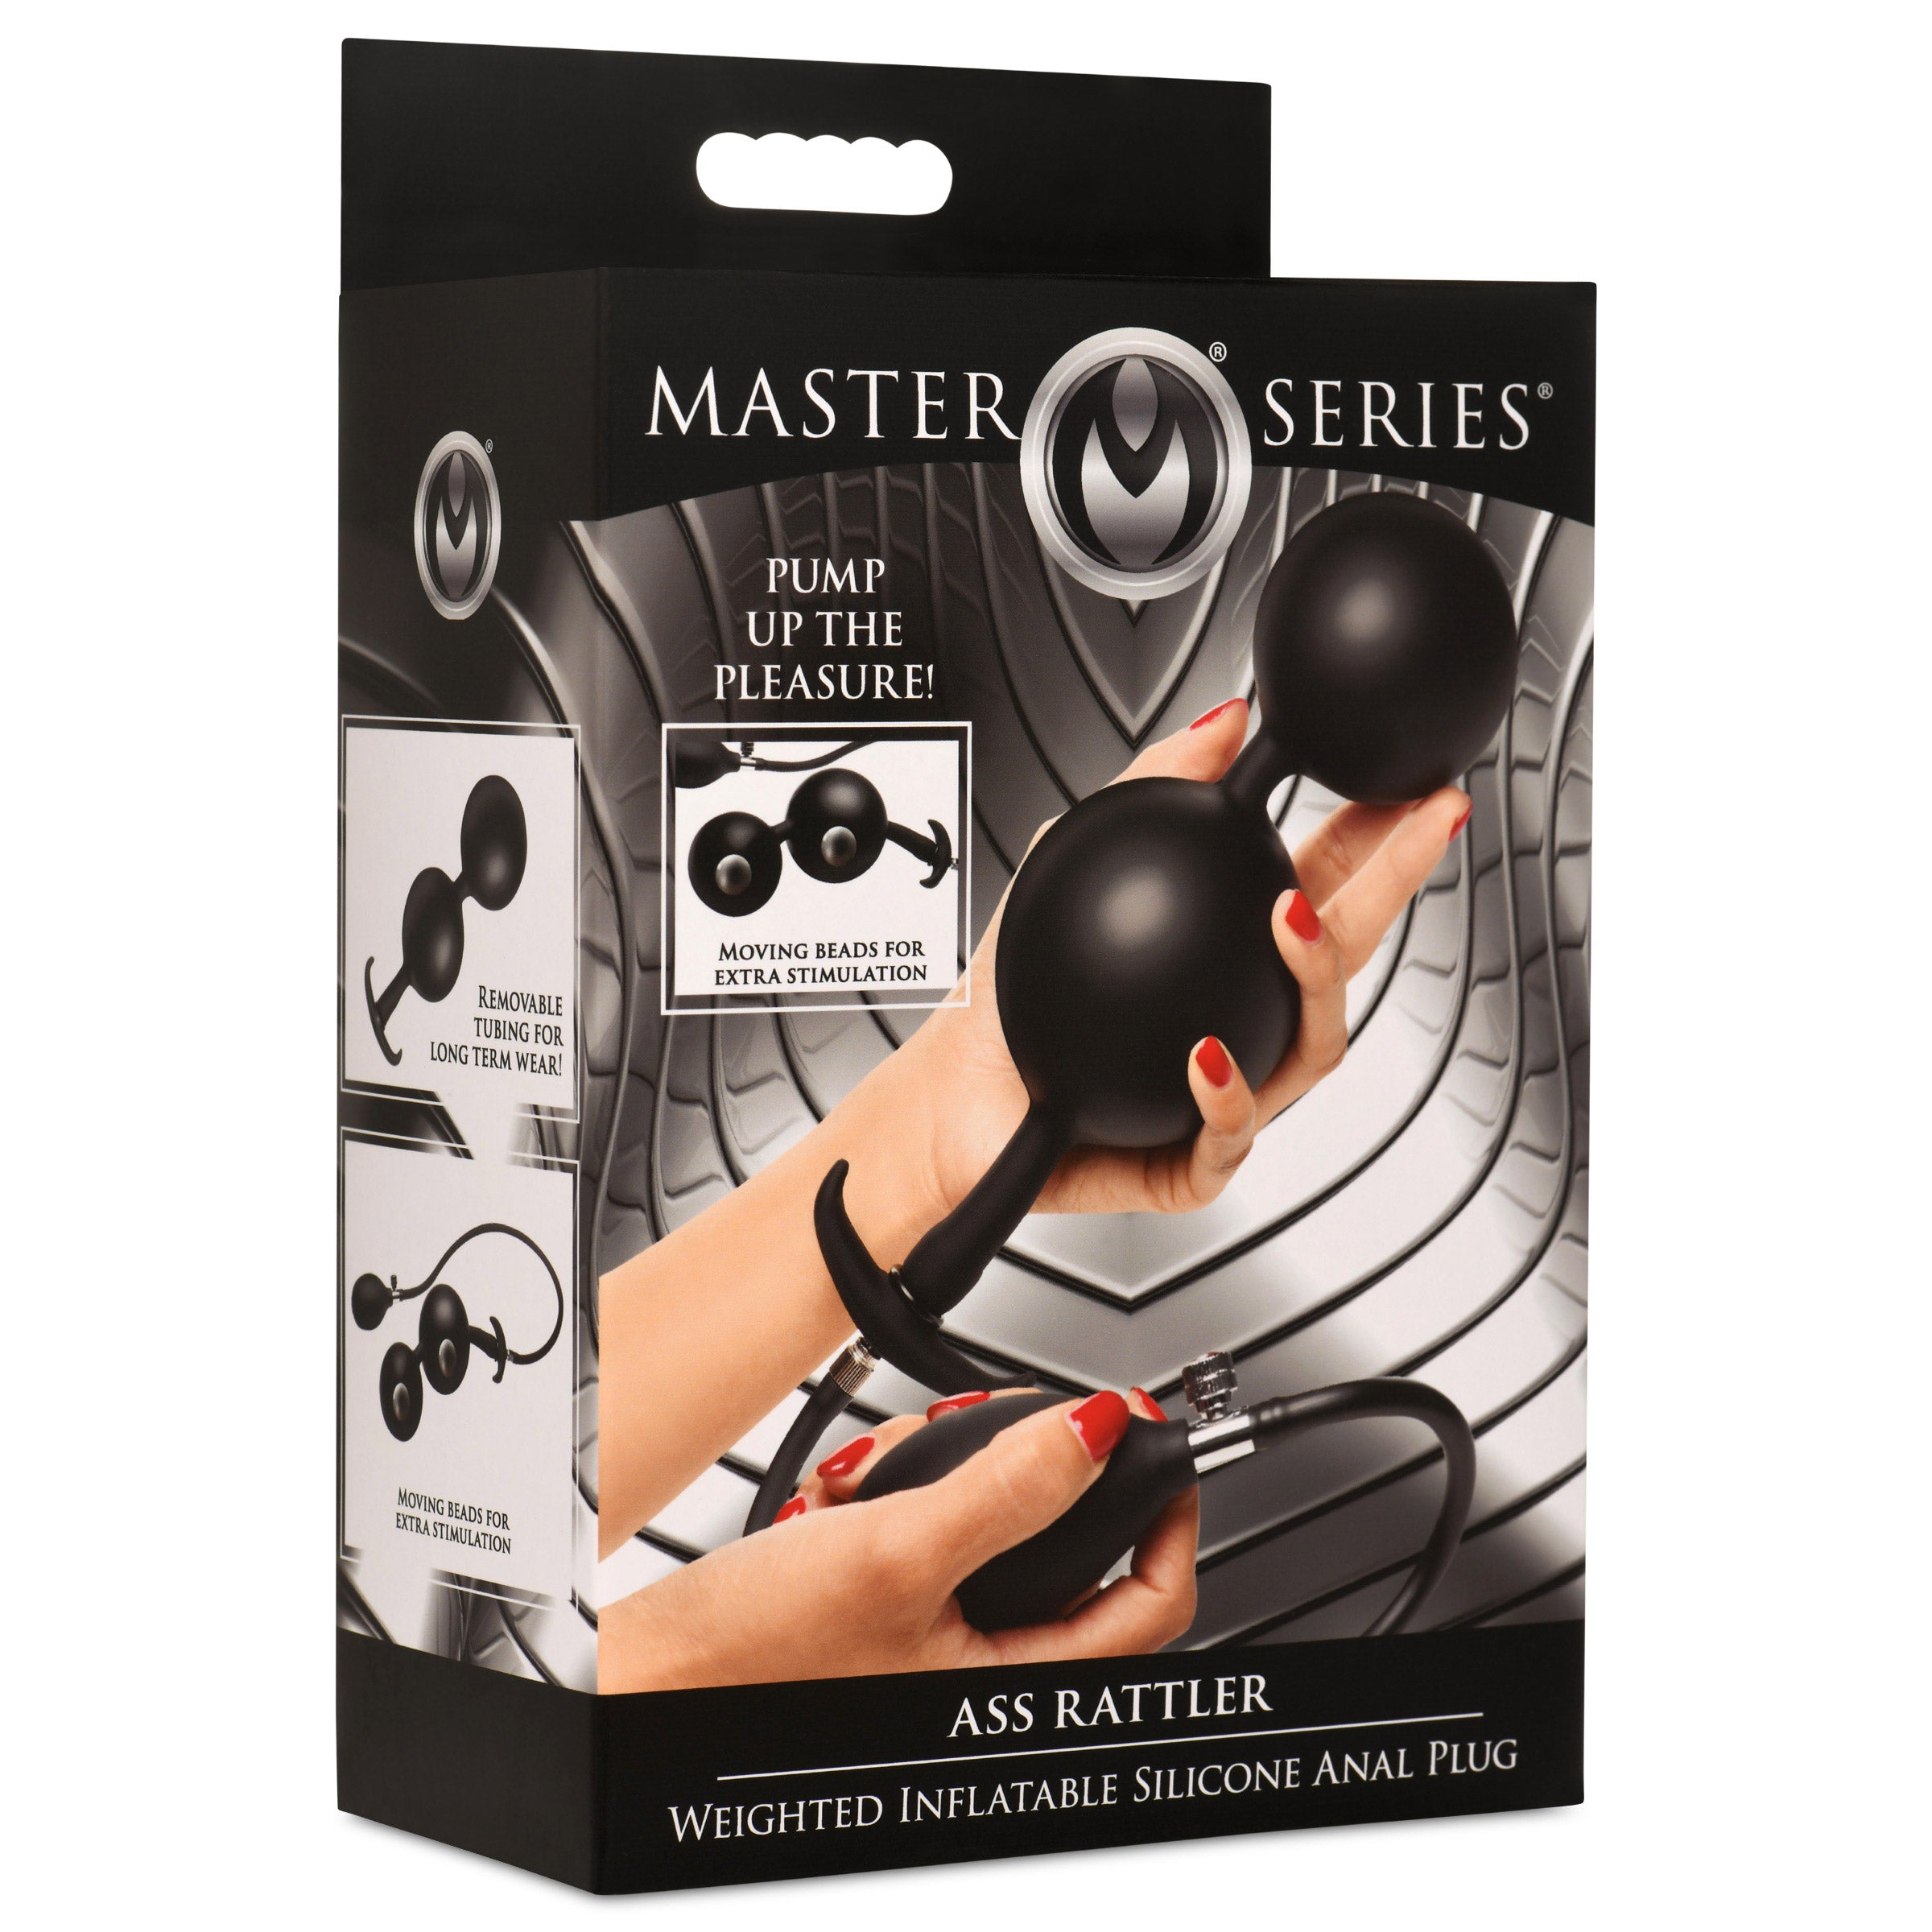 Ass Rattler Weighted Inflatable Silicone Anal Plug